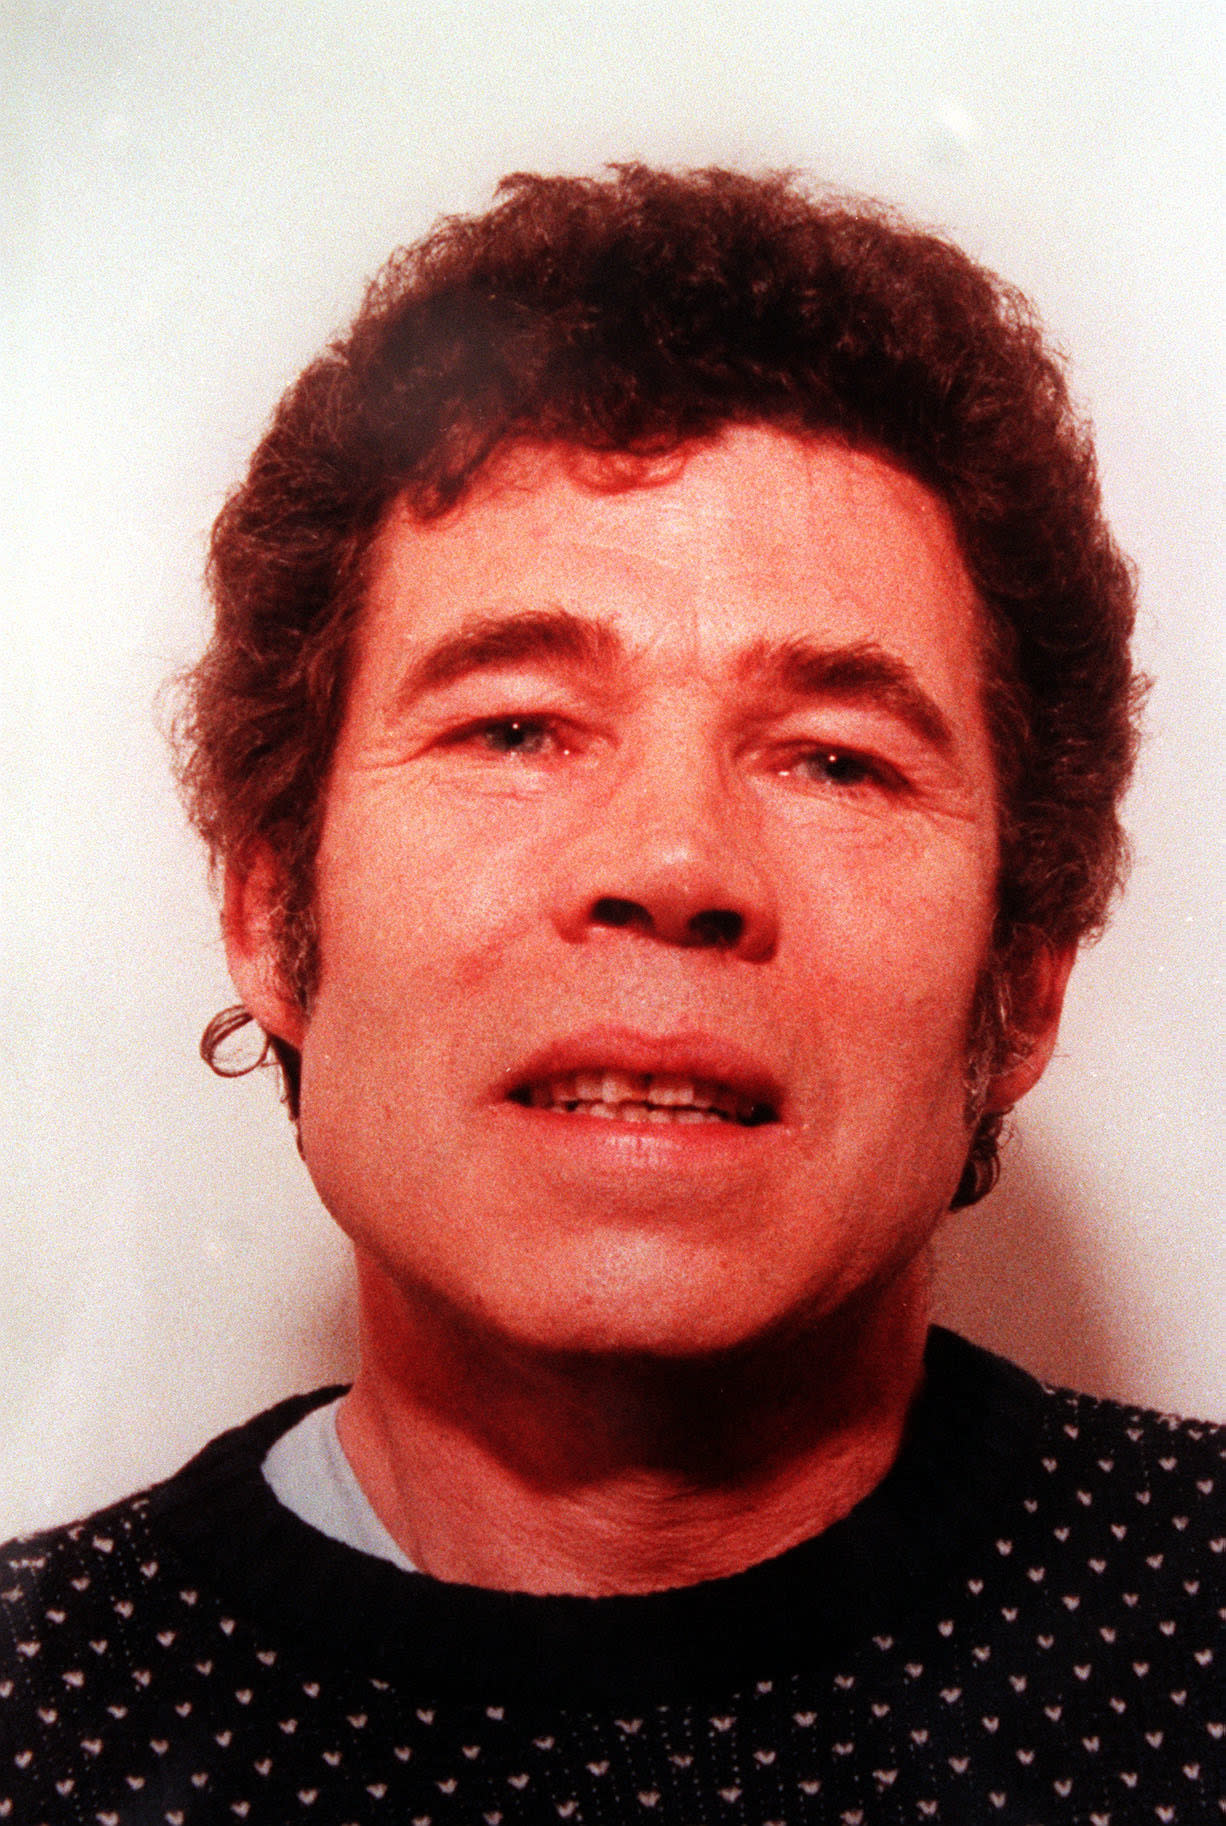 A police-issued photograph of Fred West after his wife Rosemary West had been imprisoned for life on ten counts of murder. 24/8/01: West whose police interviews are to be broadcast for the first time after Gloucestershire Police failed in their bid to have them banned.  *  Lord Goldsmith, the Attorney General, has dismissed a request by the force to prevent screening of the taped interviews on a Channel 5 documentary, due to be shown in the autumn. It is understood that the interviews will form part of a programme that will criticise the police for failing to investigate fully claims that West committed more murders than the 12 for which he was charged.  *26/09/01 The makers of a documentary about mass murderer Fred West called for a public inquiry after claiming West admitted there could be up to 20 more bodies buried in the countryside.The Channel 5 film, which Gloucestershire police tried to stop, will broadcast excerpts from hundreds of hours of Fred West's taped interviews with detectives and his defence solicitor.  In one extract West describes to detectives how he disposed of one of his victims on a moonlit night in his back garden by burying her body parts in a hole. 